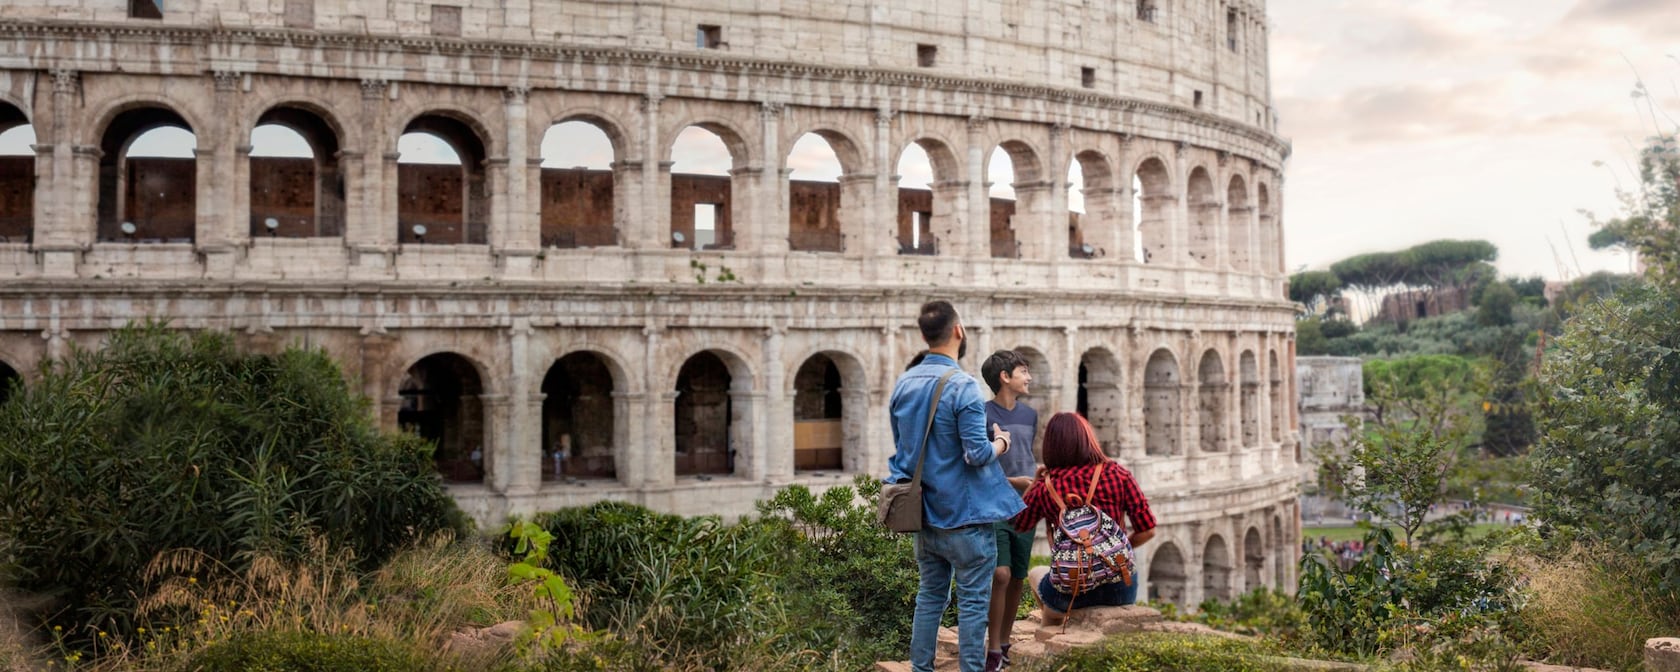 A couple and their child outside the world famous Colosseum in Rome, Italy